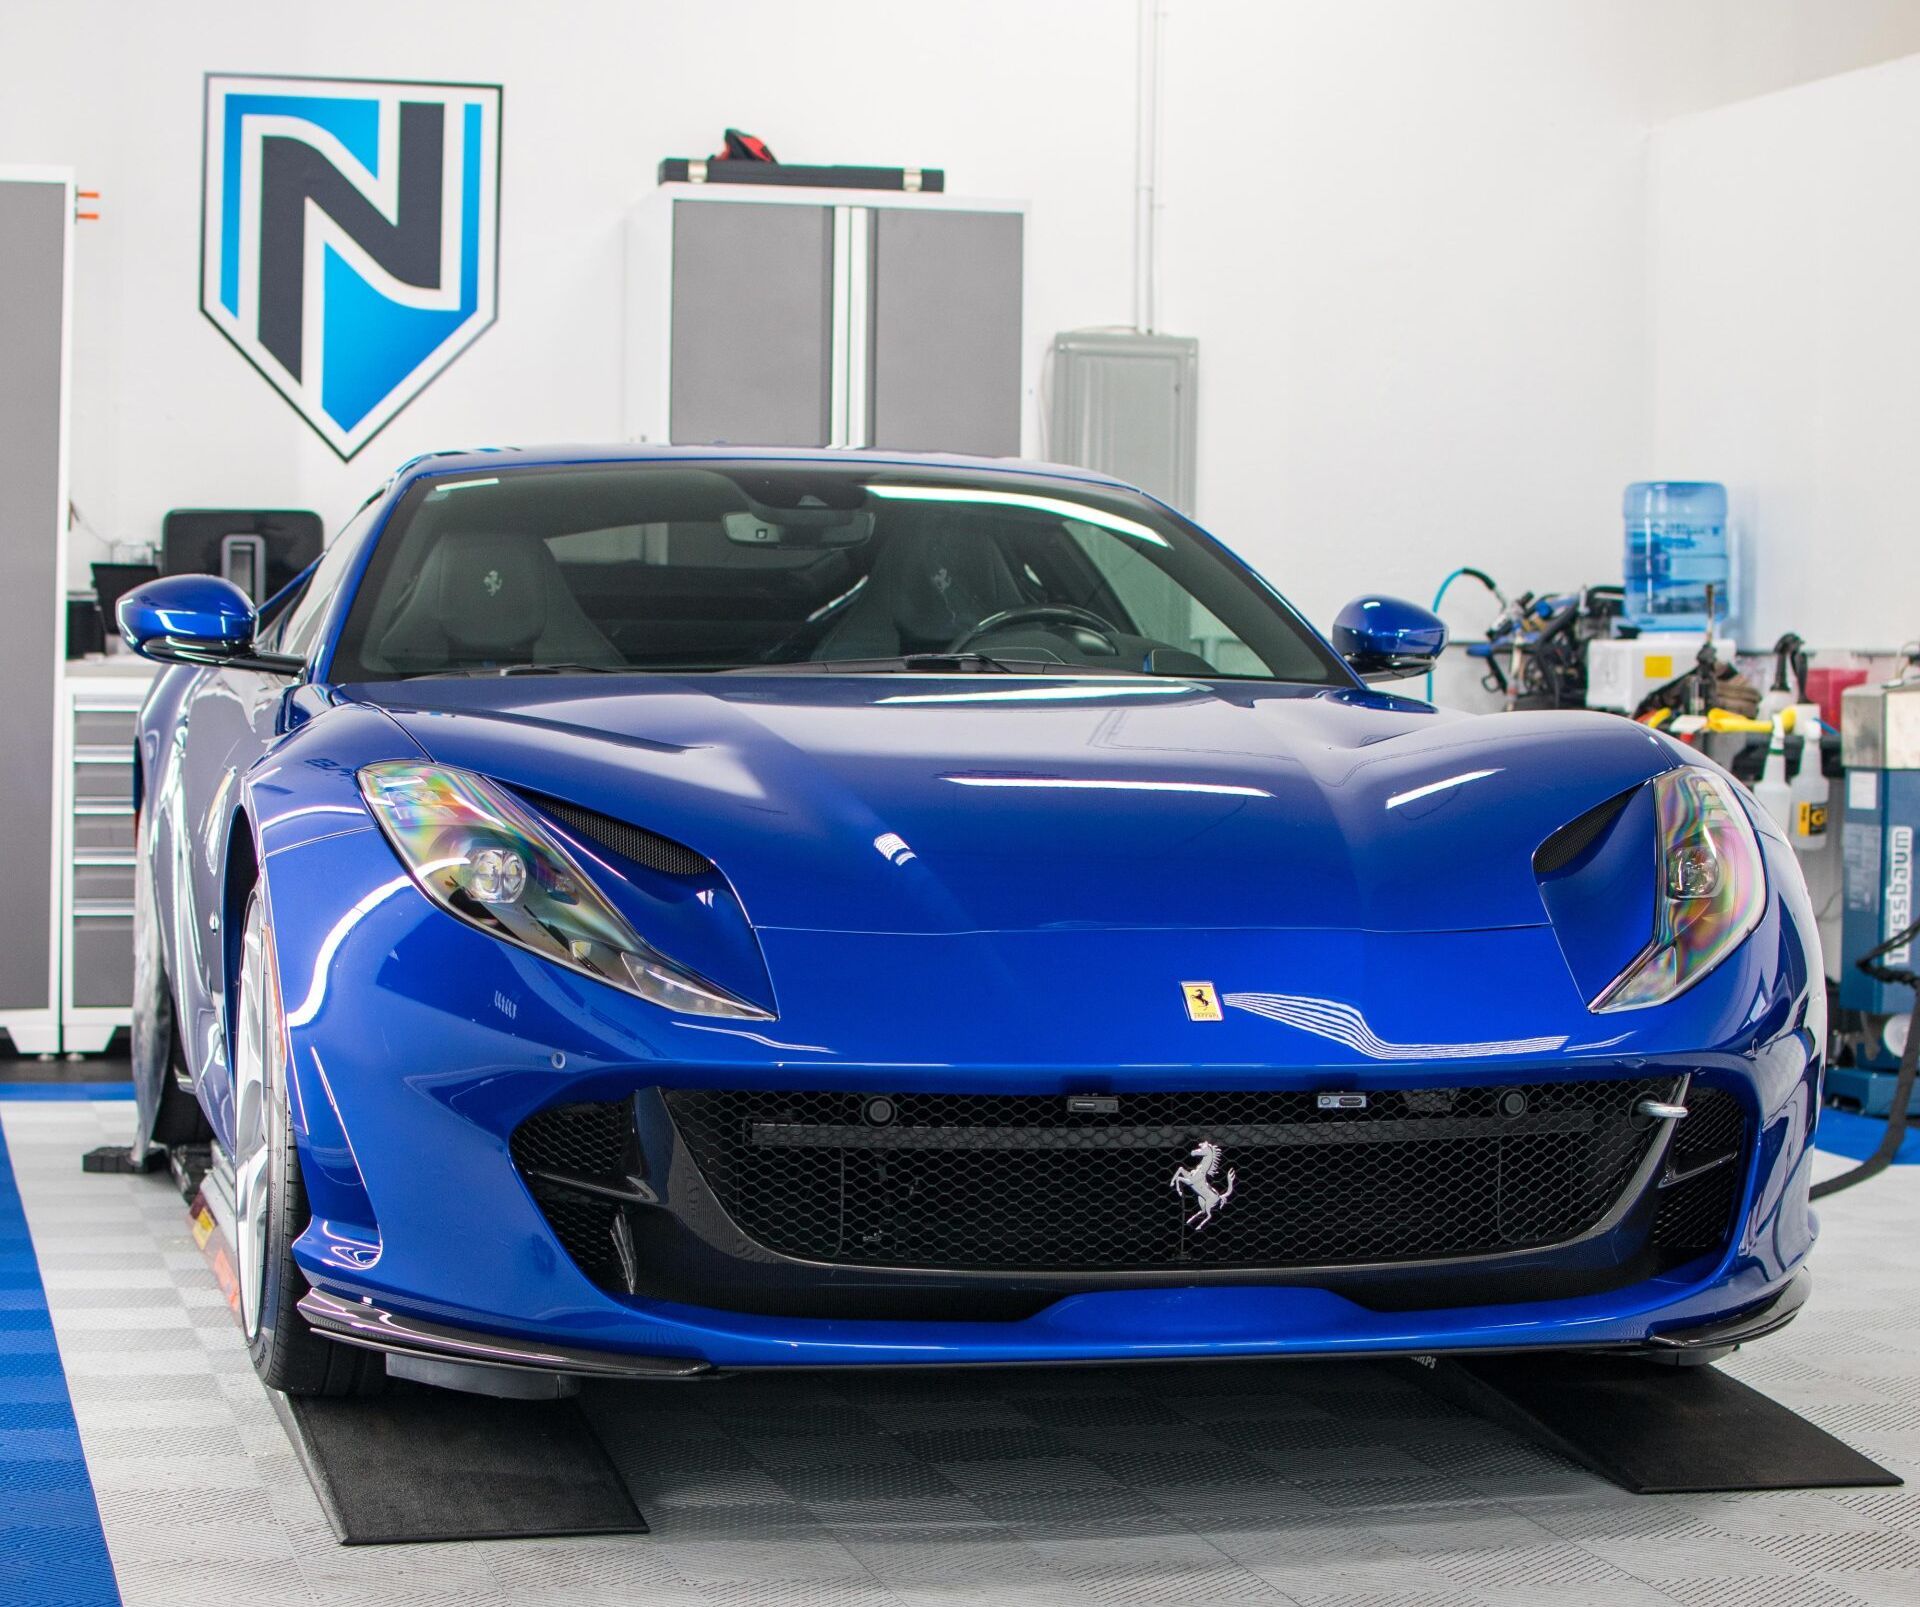 A blue ferrari is parked in a garage with a shield on the wall.